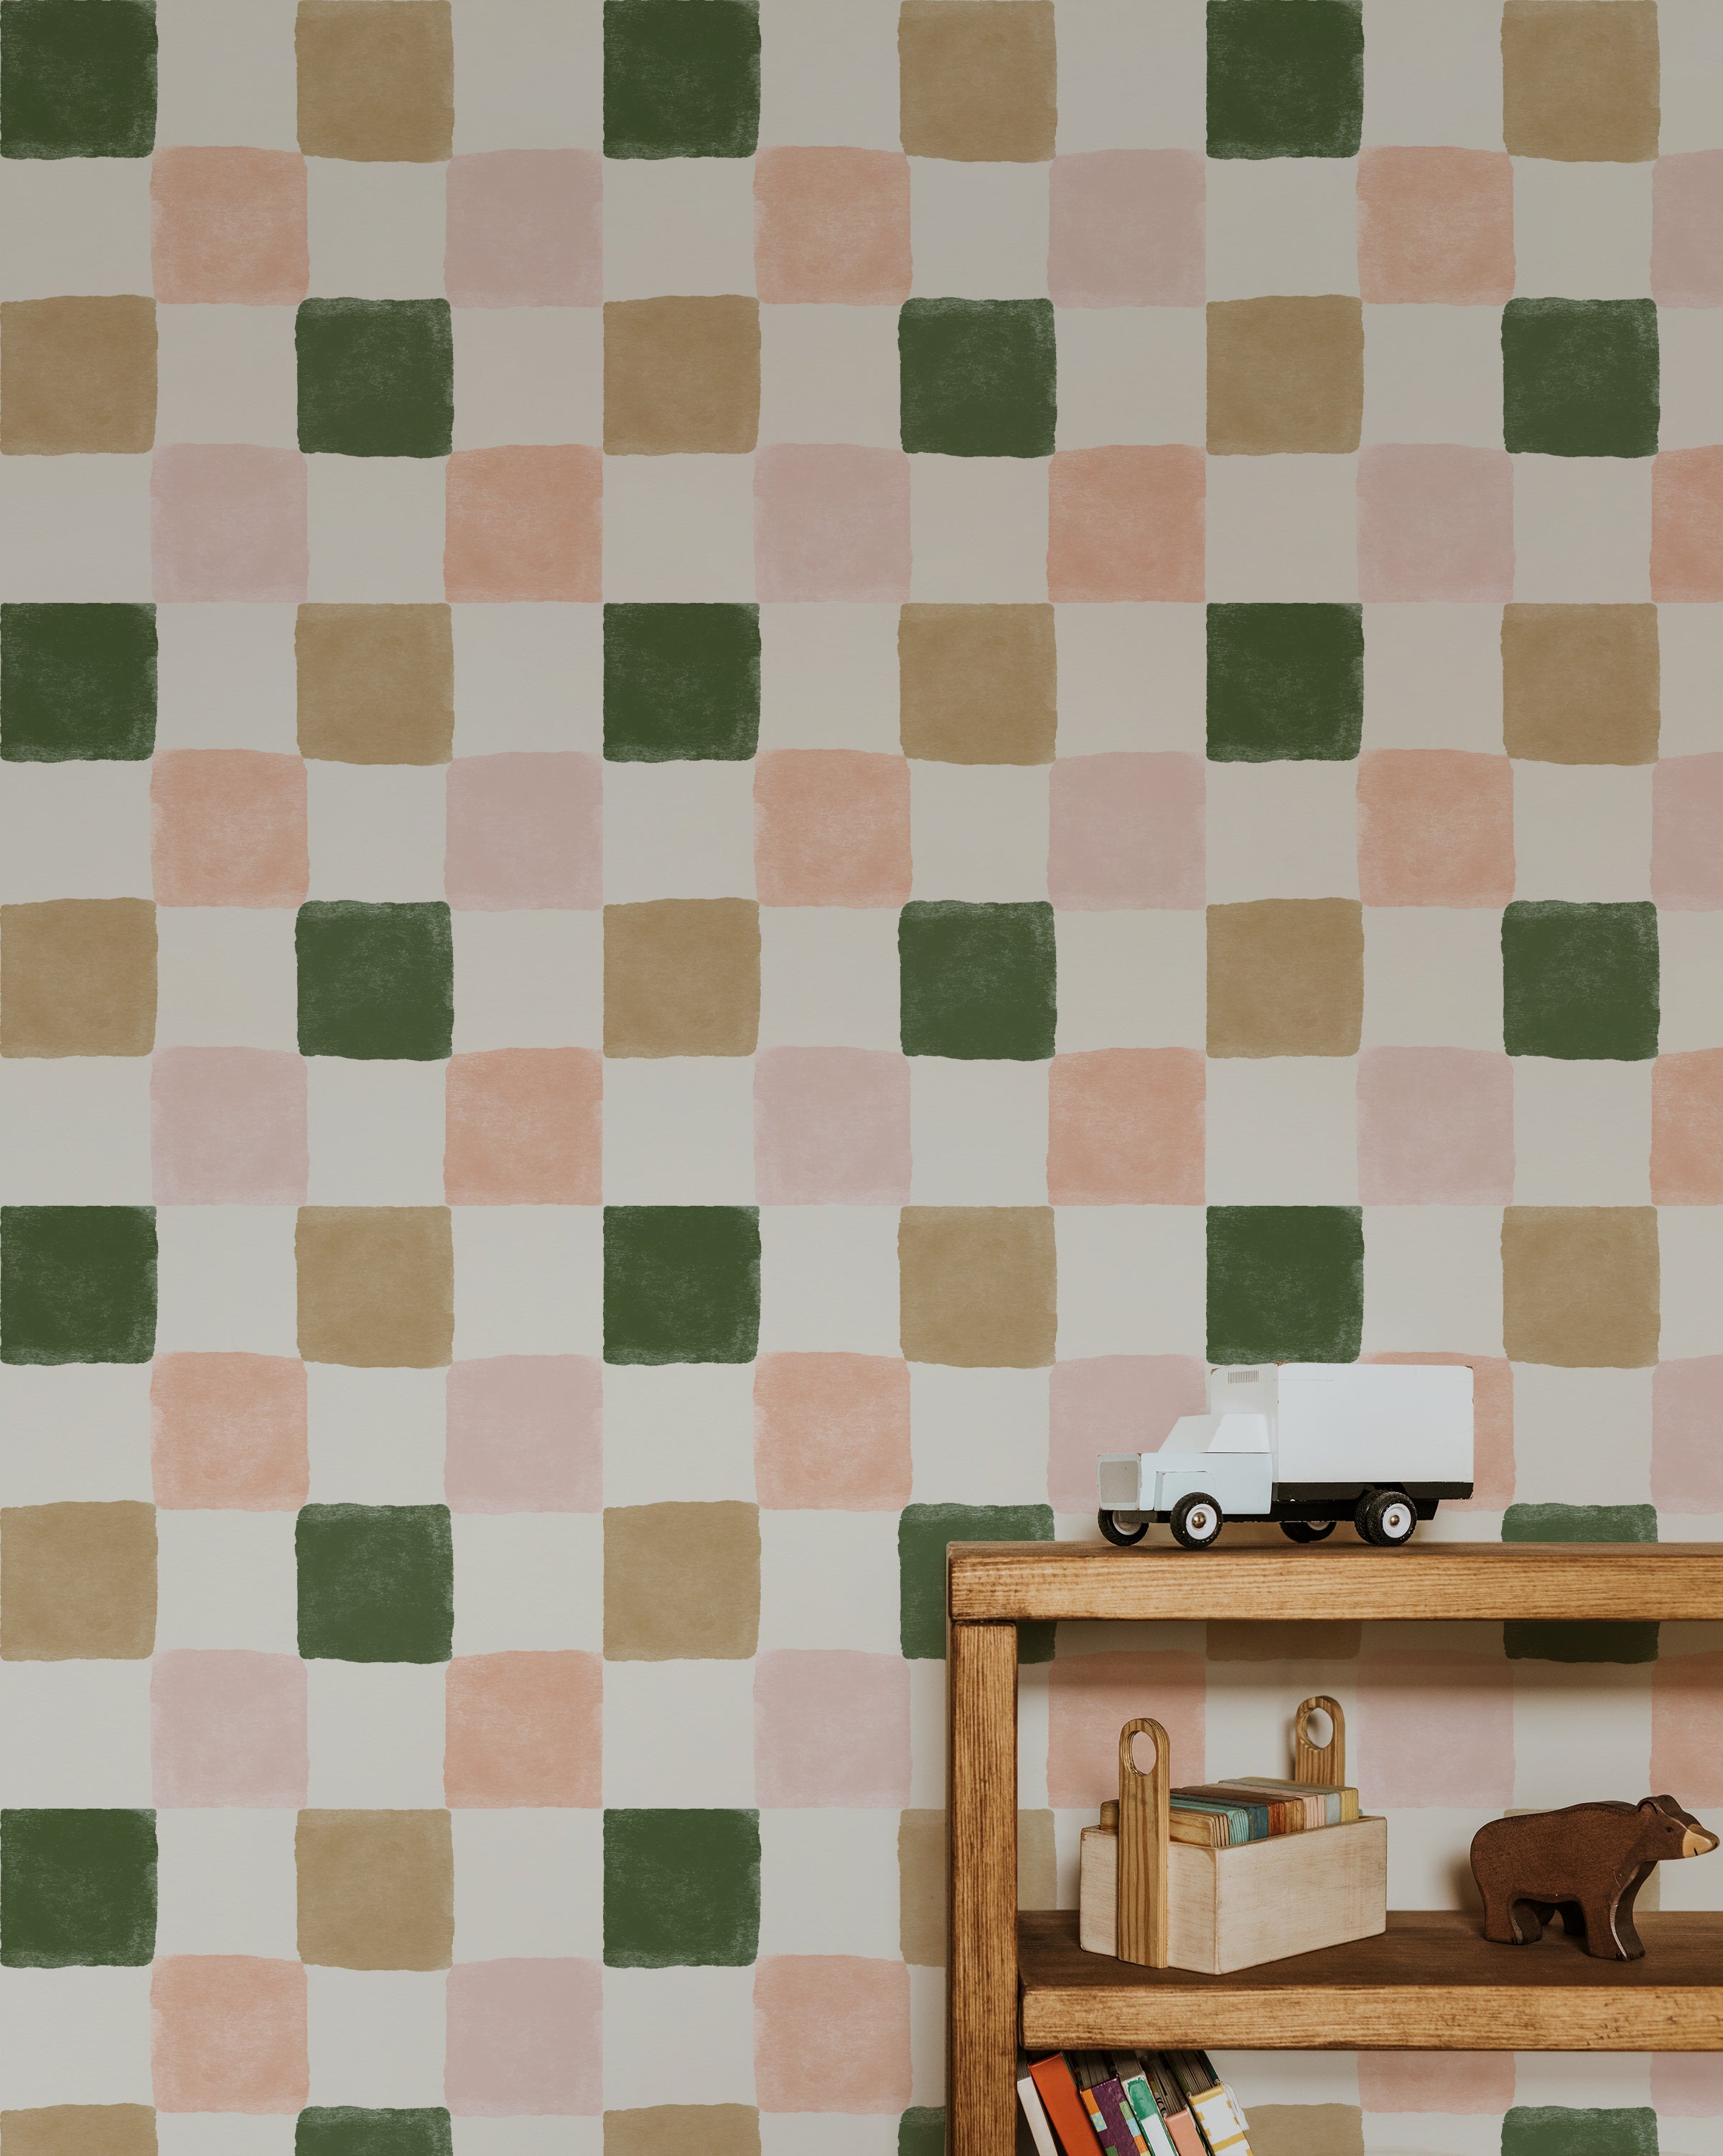 A room featuring Clémence Wallpaper II with a checkered pattern in shades of green, beige, pink, and white. The wallpaper covers the wall behind a wooden shelf with books and toys, including a white toy truck.